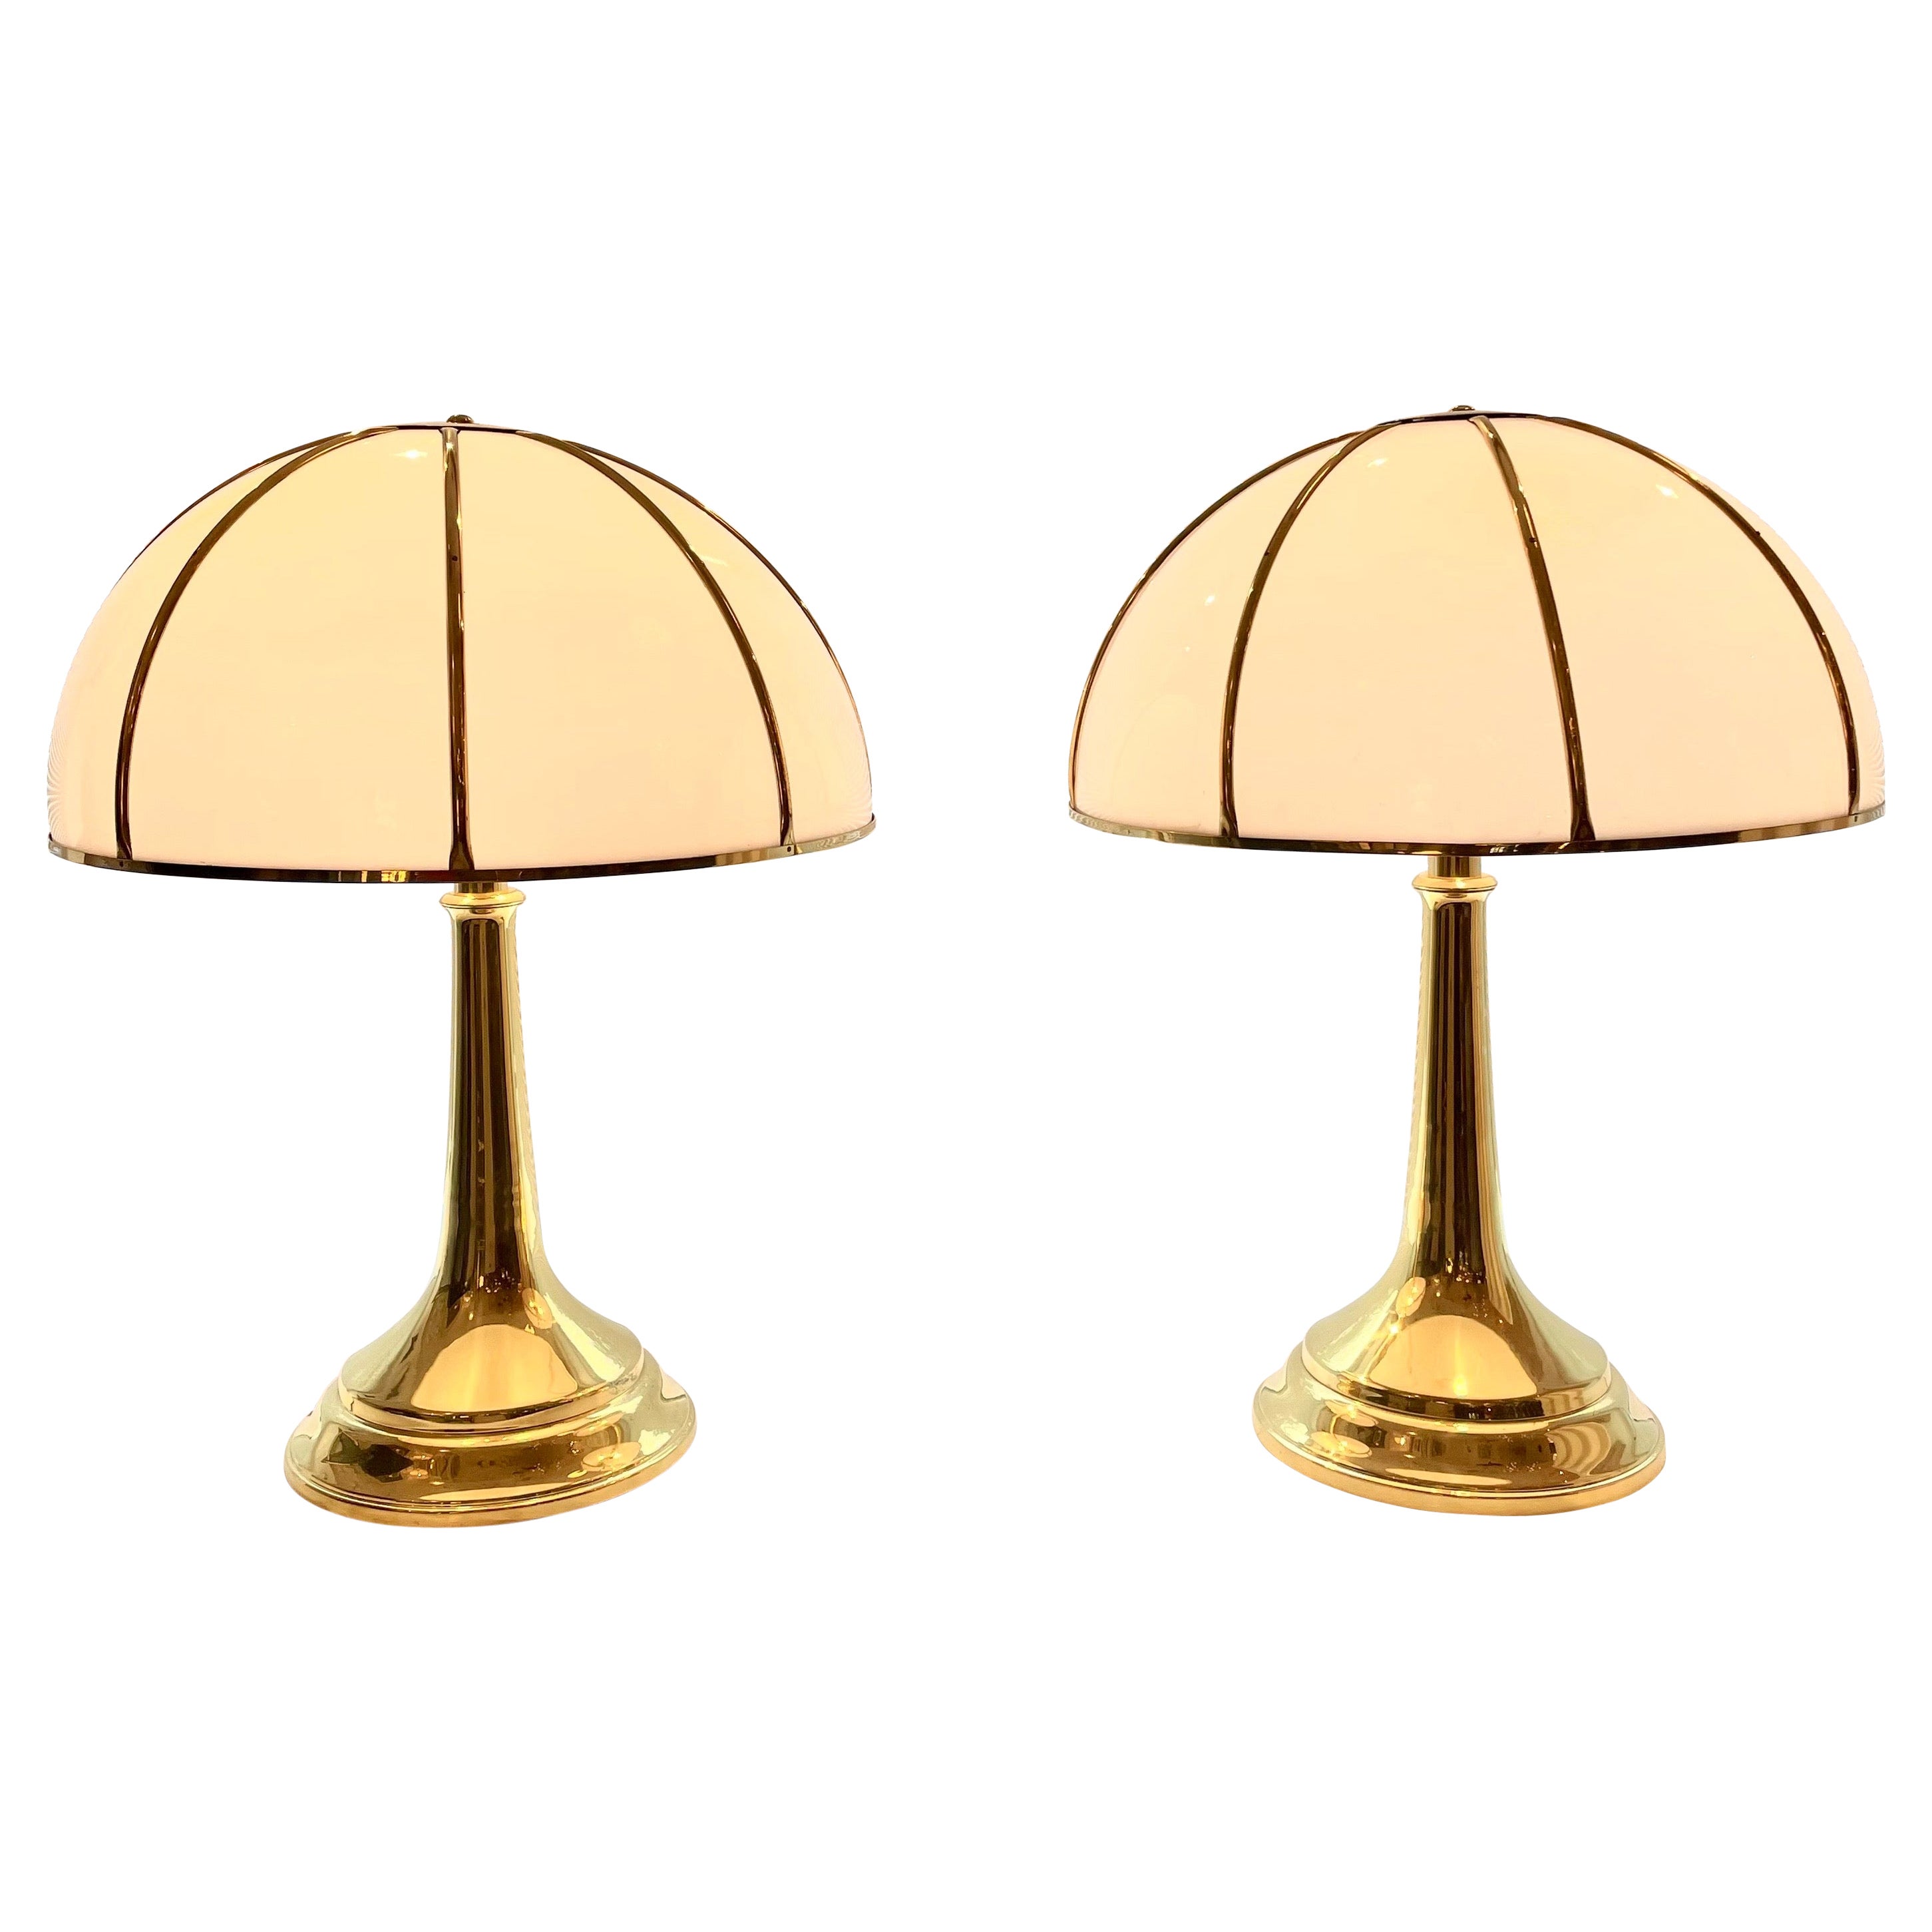 Gabriella Crespi Fungo Table Lamps, Double Signatures on Pair